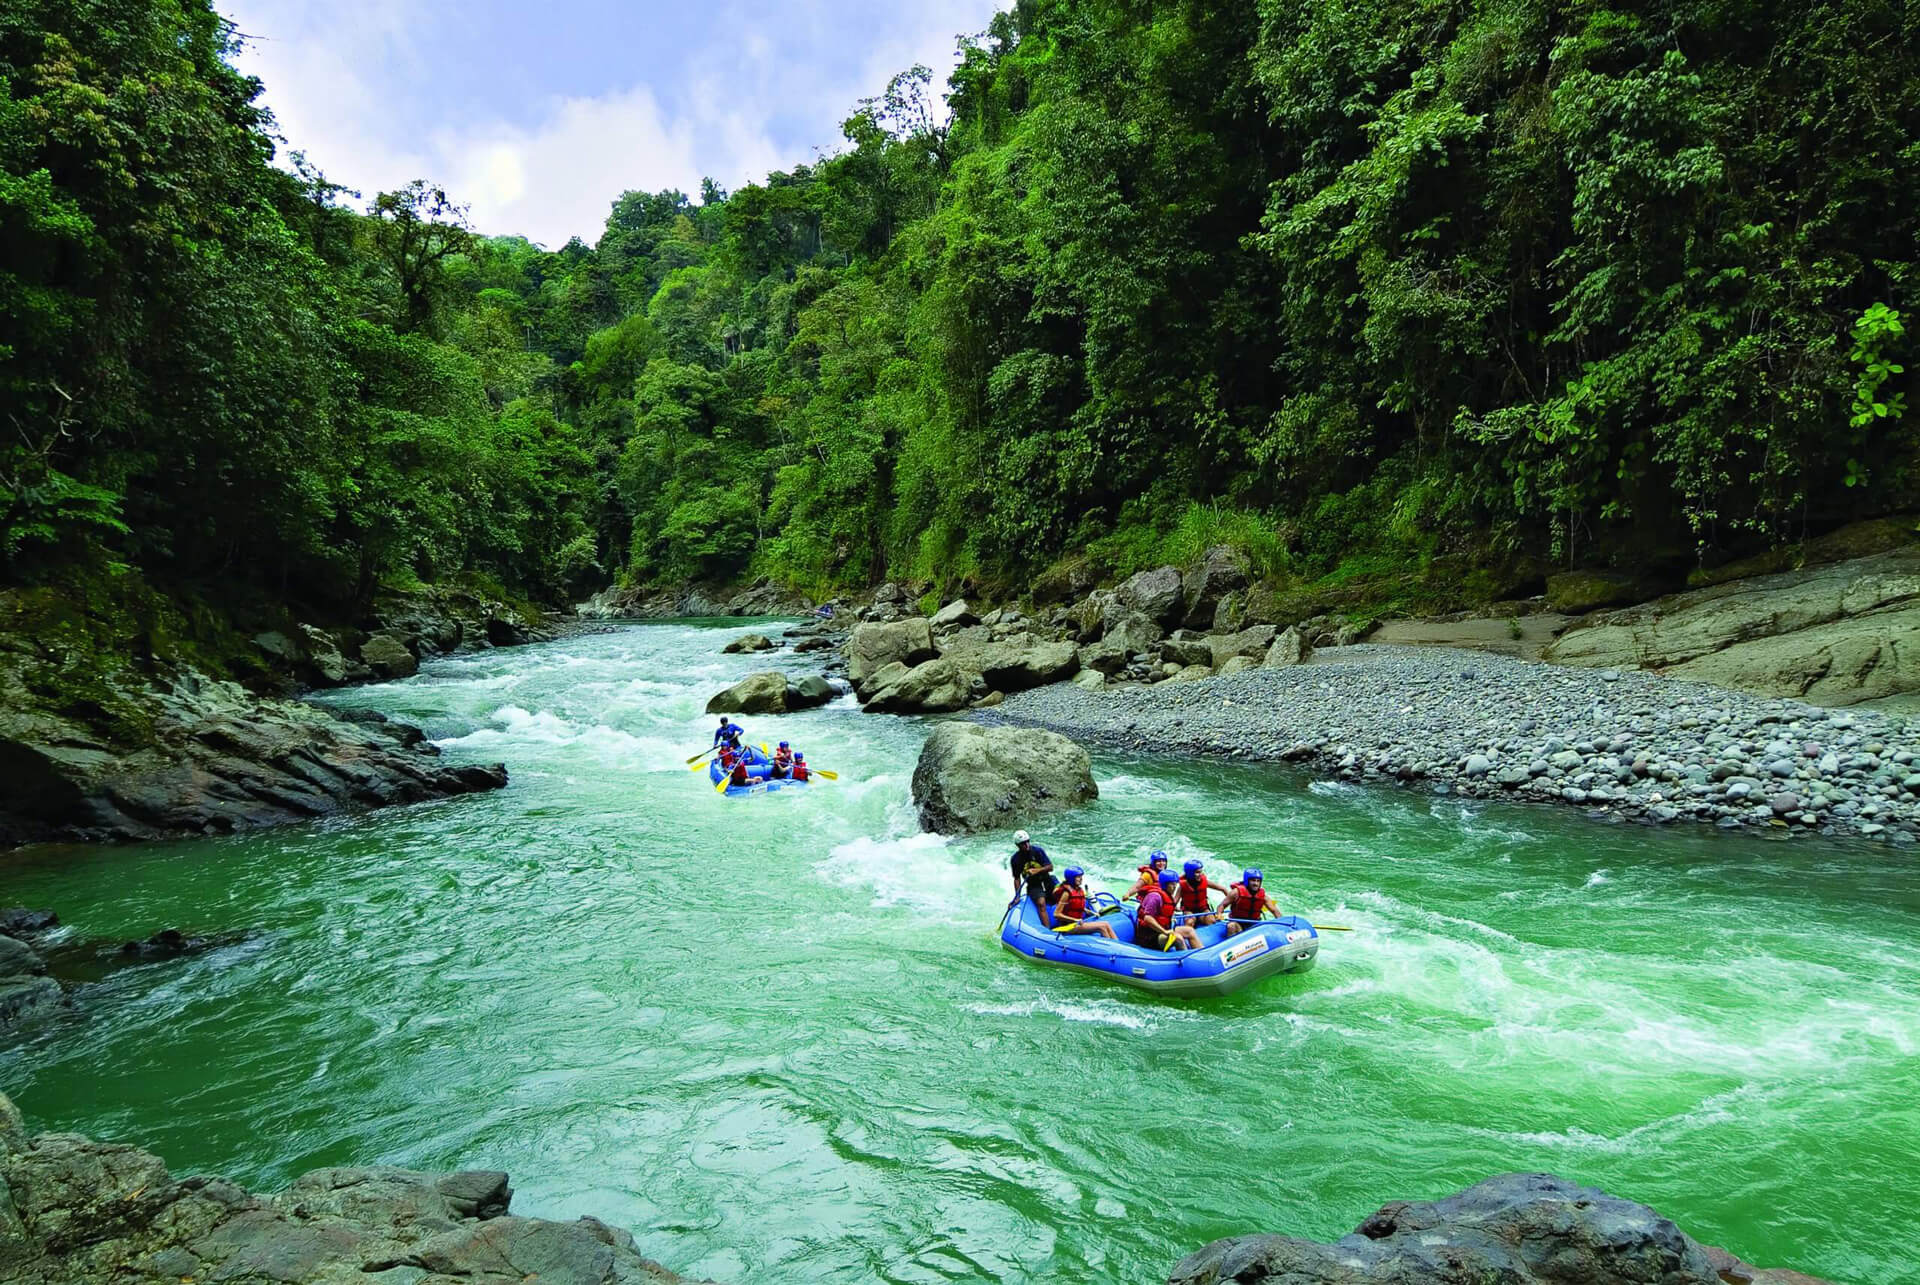 Rafting excursion in the Pacuare River during a private Costa Rica luxury tour